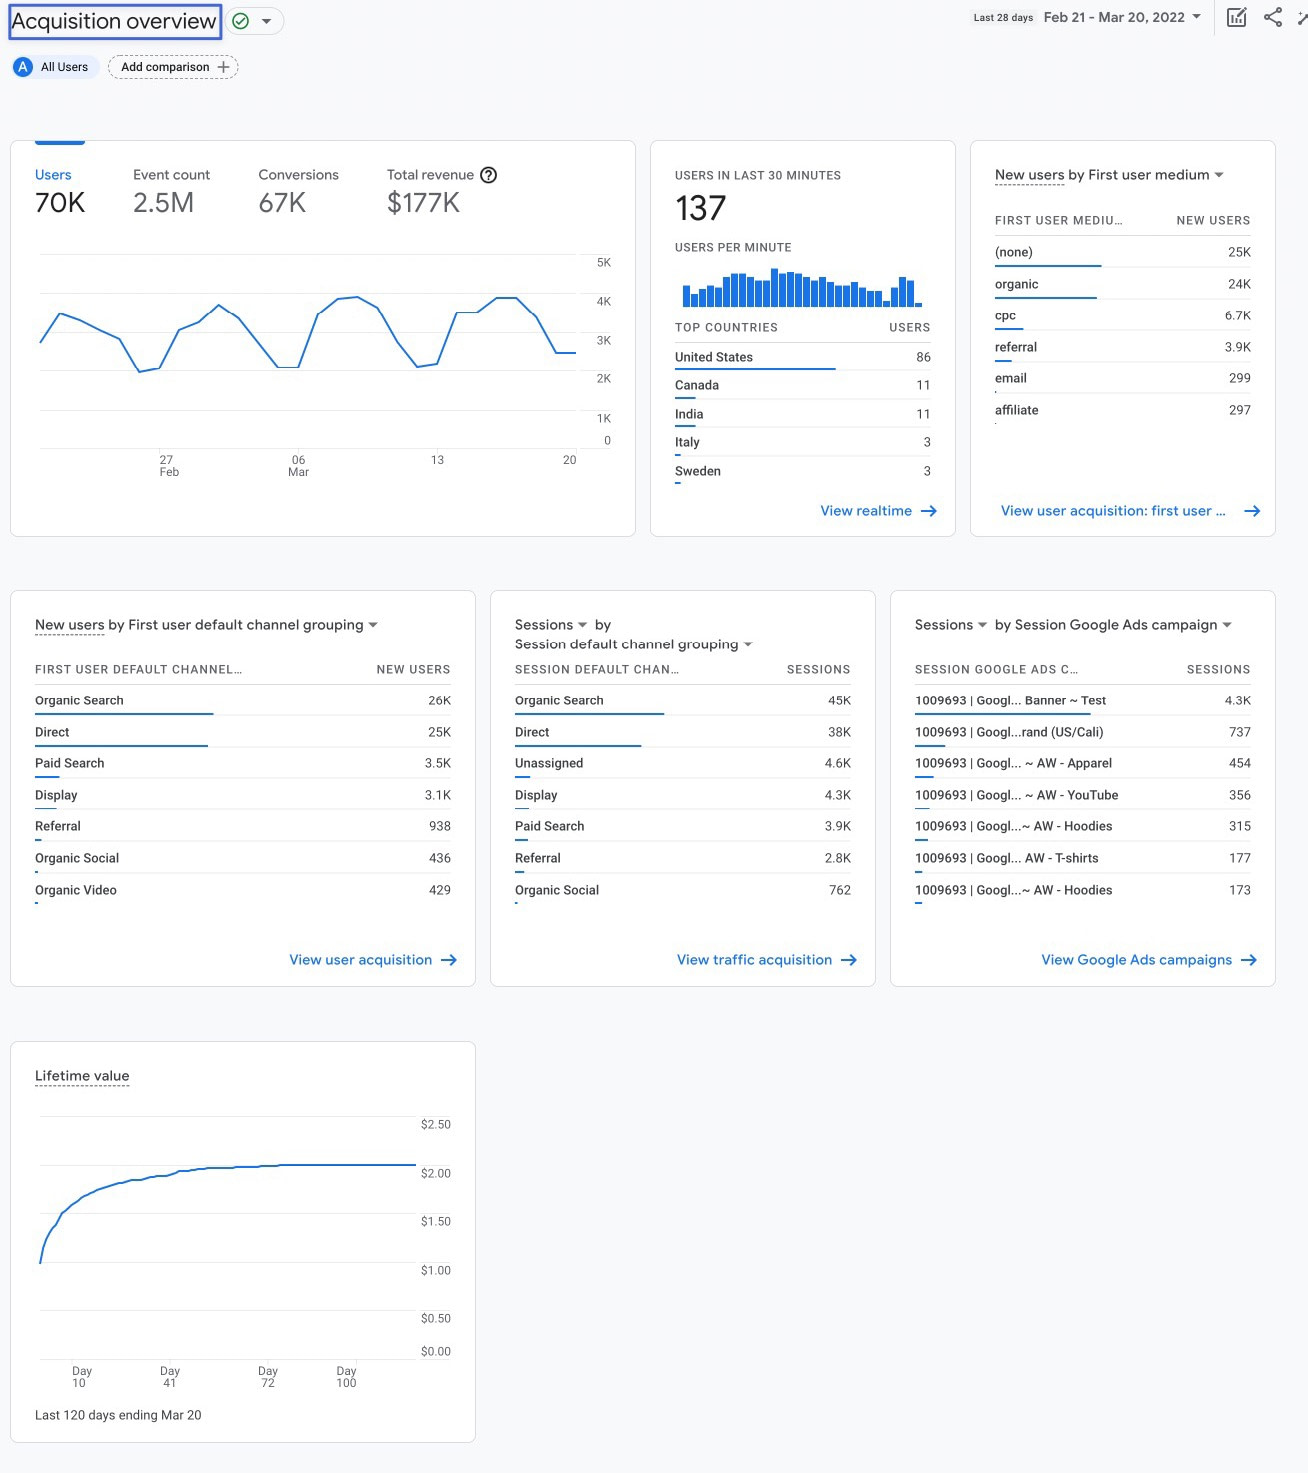 acquisition overview section of the Google Analytics interface